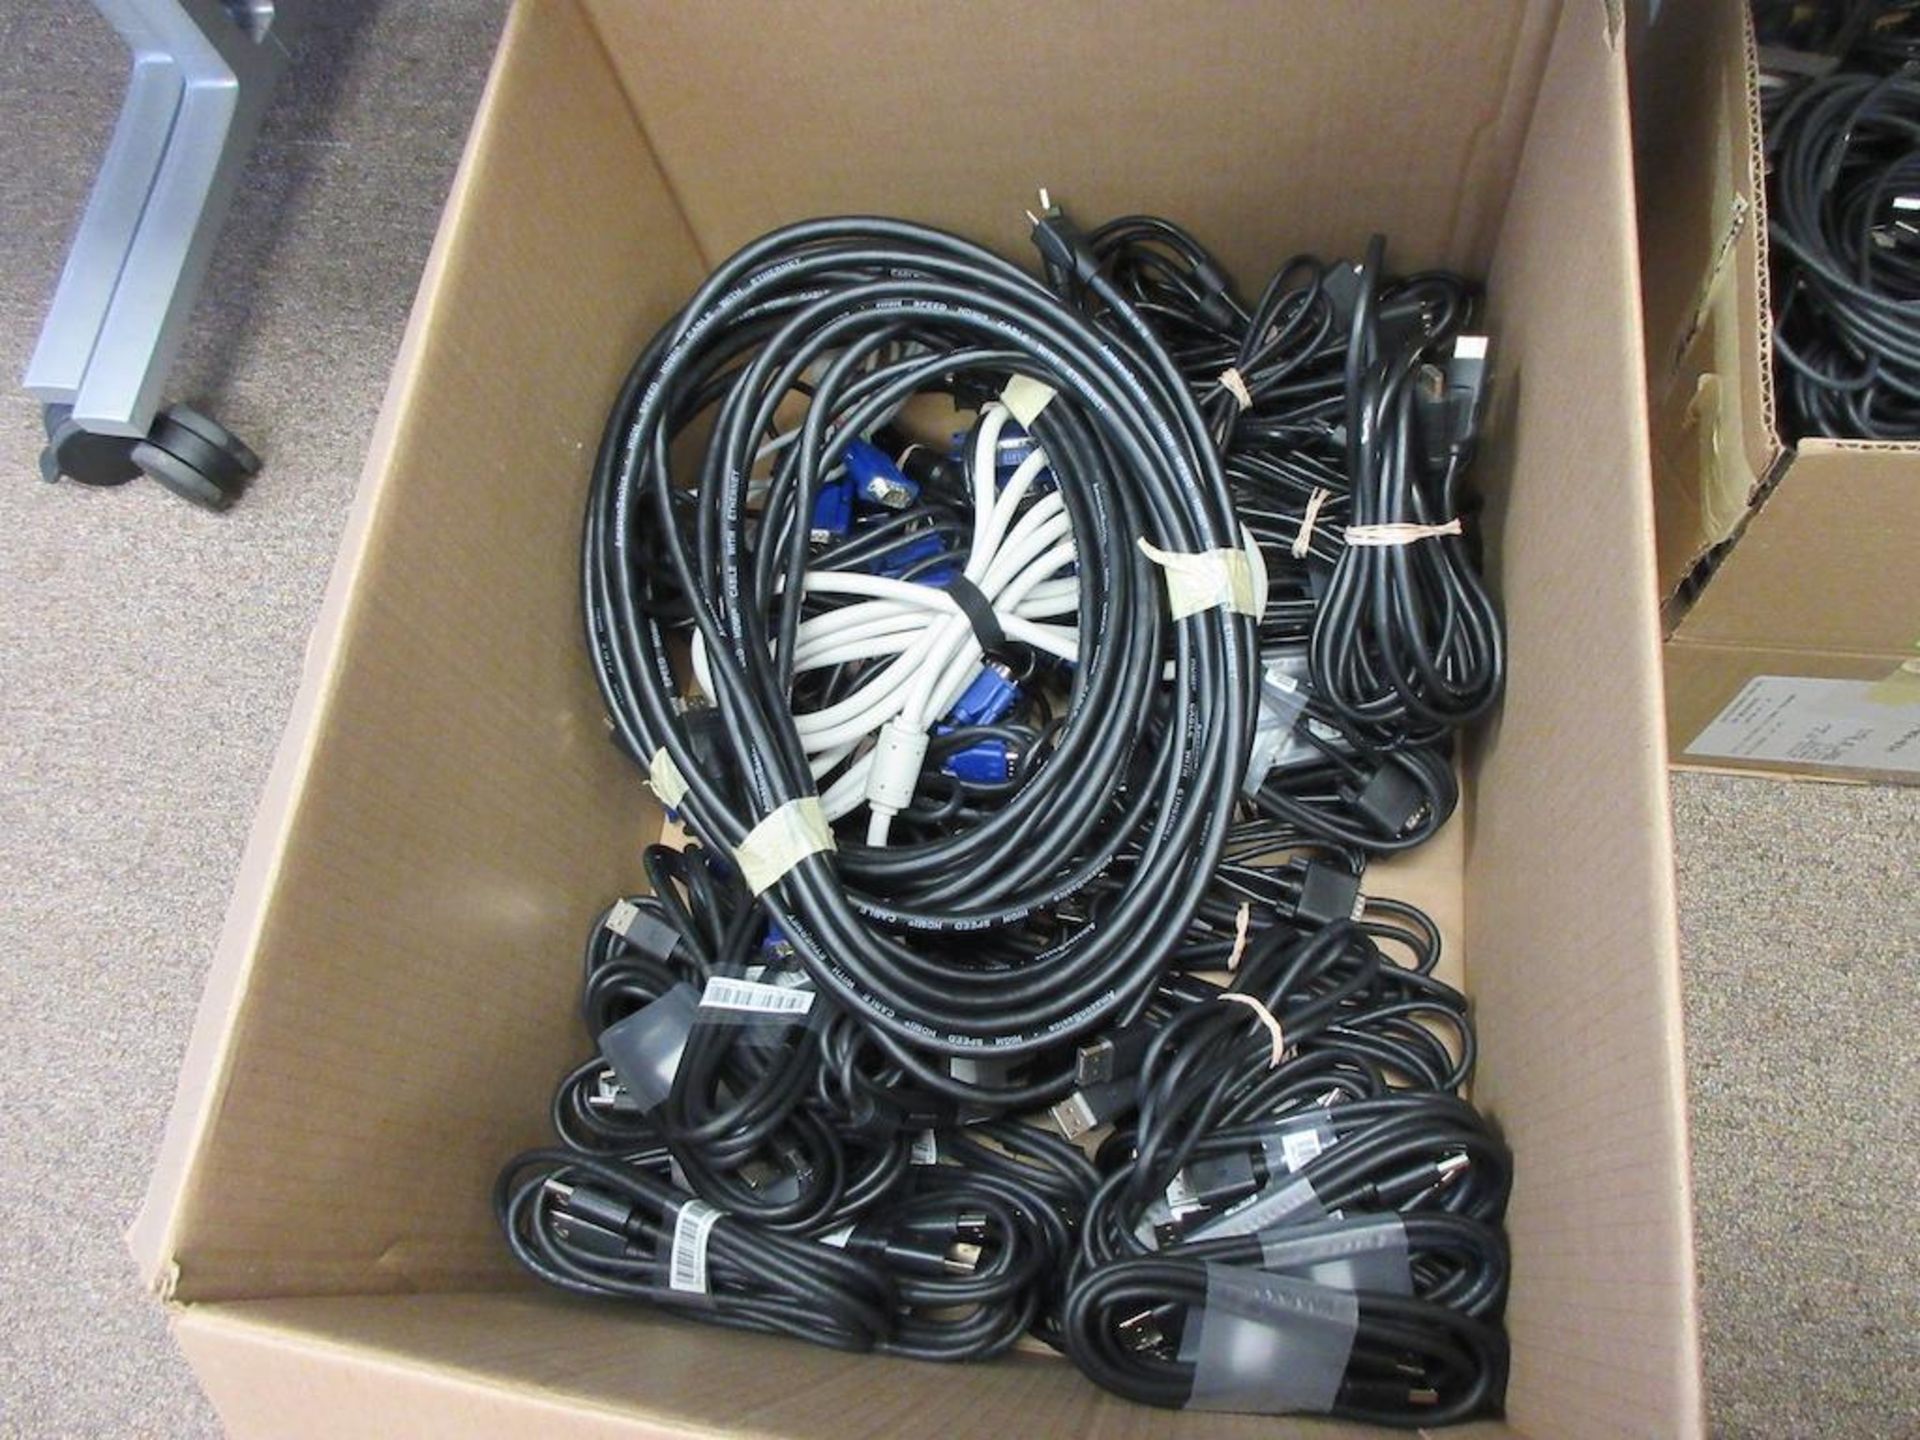 BOX W CABLES INCLUDING: (28) 6' DISPLAY PORT CABLES, (12) 8' VGA CABLES, (21) 6' VGA CABLES, (1) VGA